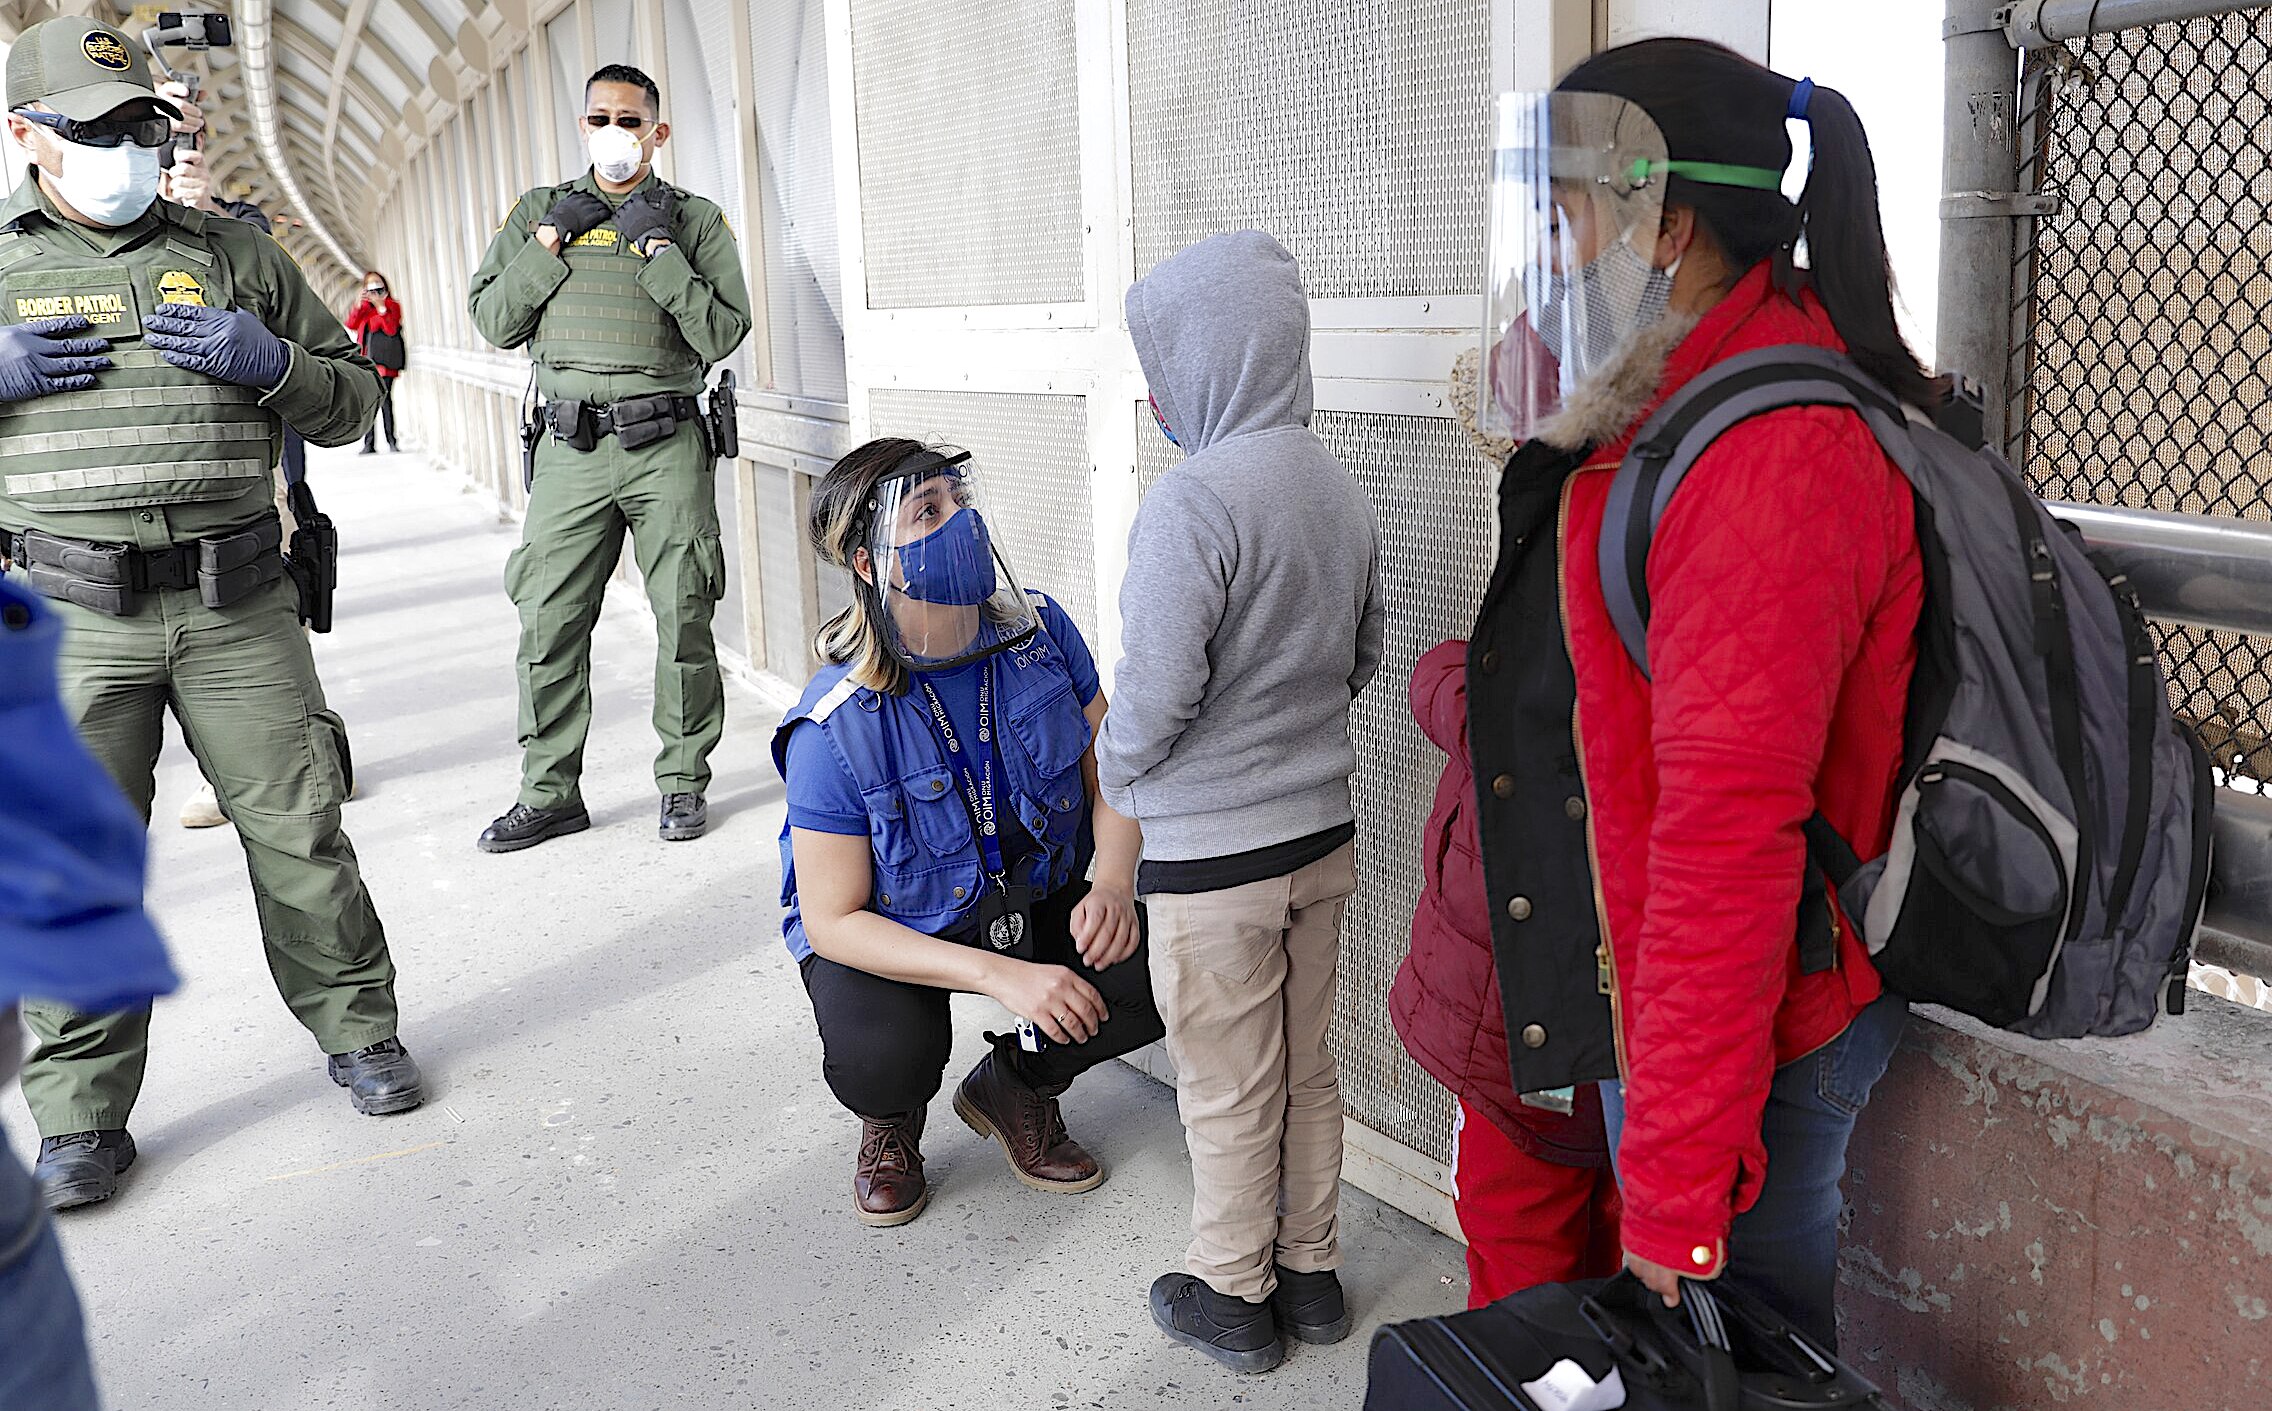 U.S. Customs and Border Protection officers and agents process a small group of asylum-seekers who have active applications under the Migrant Protection Protocols at the Paso del Norte Port of Entry in El Paso, Texas, February 26, 2021. Under the Migrant Protection Protocols established in January, 2019, migrants seeking asylum were required to remain in Mexico while their applications were processed. Migrants with the arriving group have tested negative for Covid-19 prior to making the crossing as DHS has begun the first step in a phased restoration of safe and orderly processing at the Southwest Border. CBP photo by Glenn Fawcett